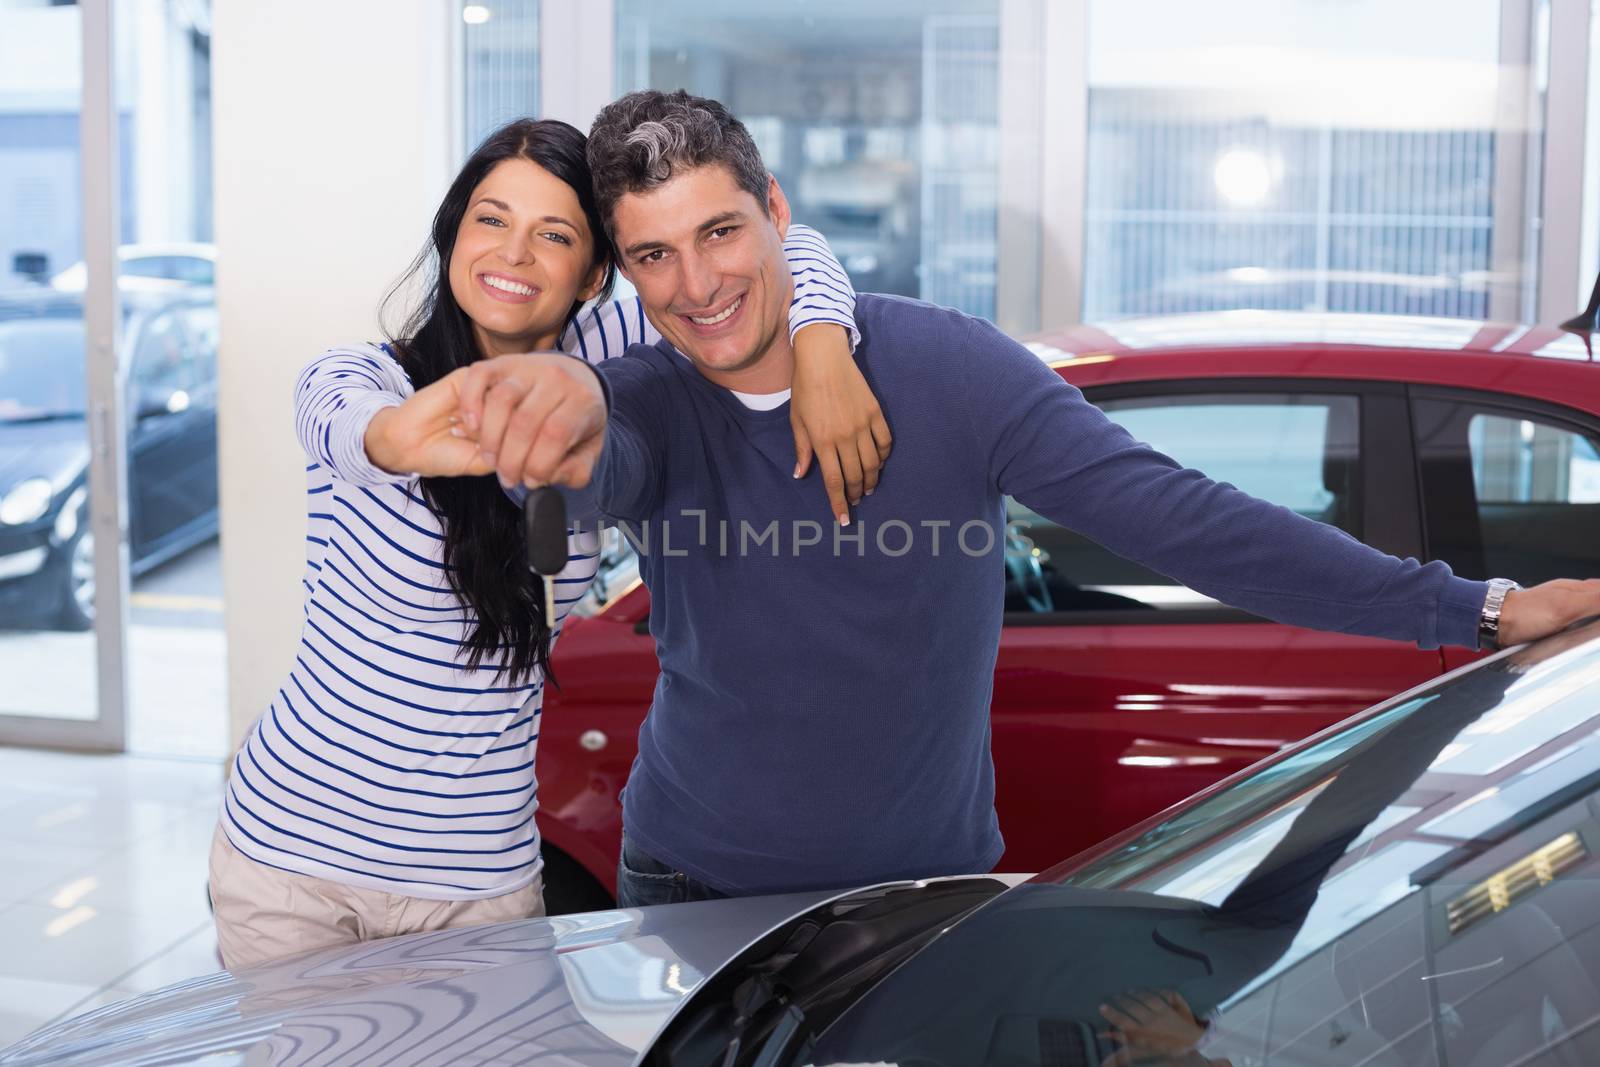 Smiling couple holding their new key at new car showroom